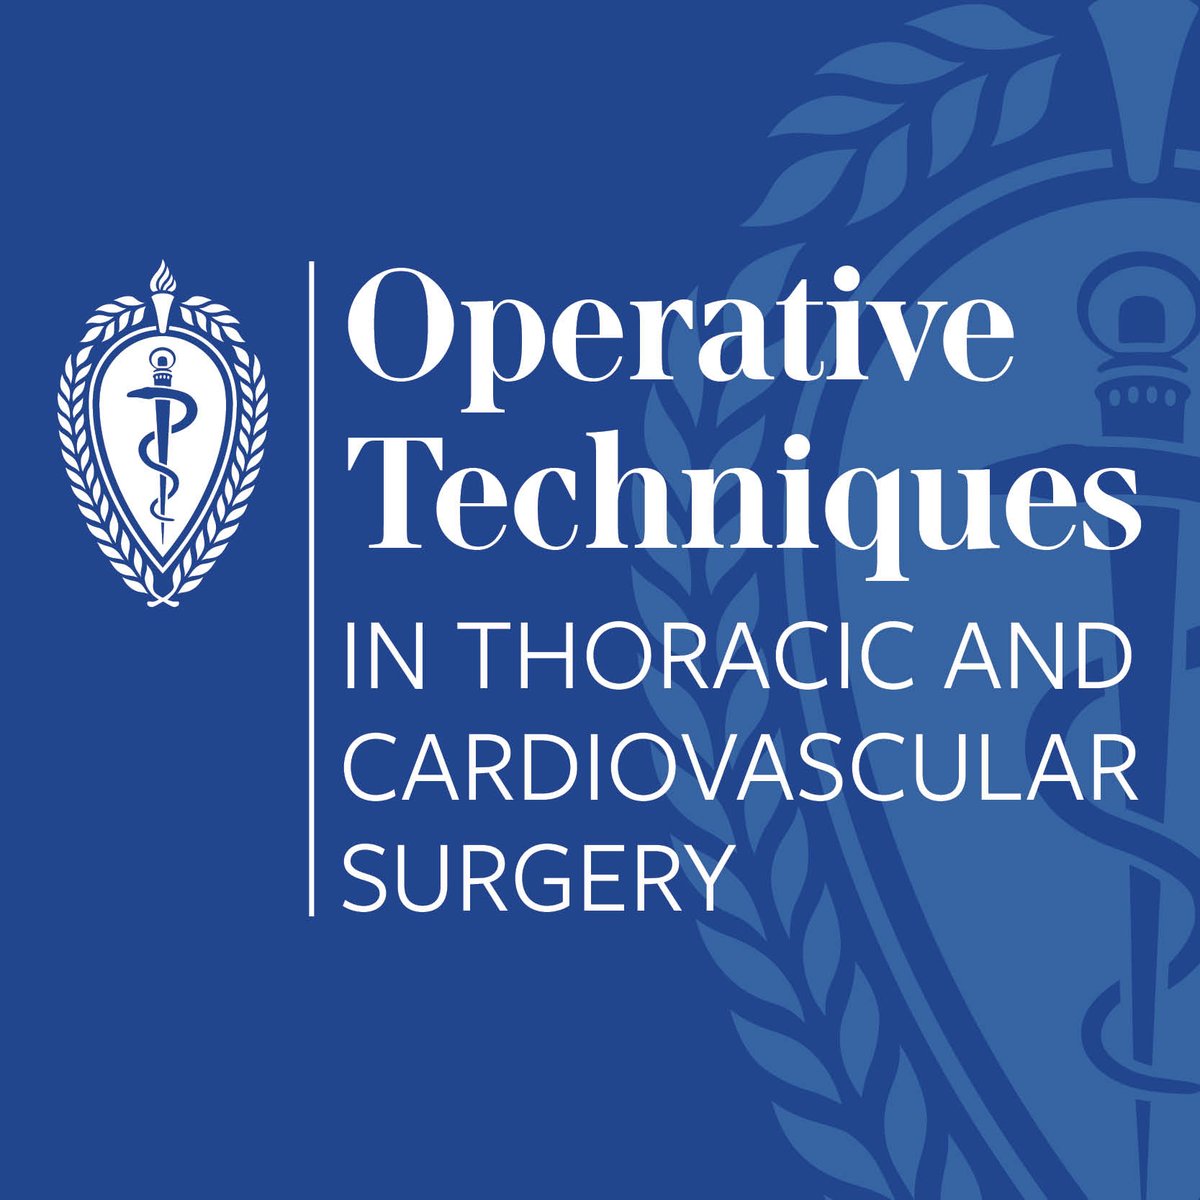 ❄️ The Winter 2023 issue of OpTechs has published. View the Table of Contents here: optechtcs.com/current #JTCVS #CardioTwitter #ThoracicSurgery #CTSurgery #cvsurg @AATSHQ @tssmn @MBMarshallMD @OPreventzaMD @konstantinov_ie @UsmanAhmadMD